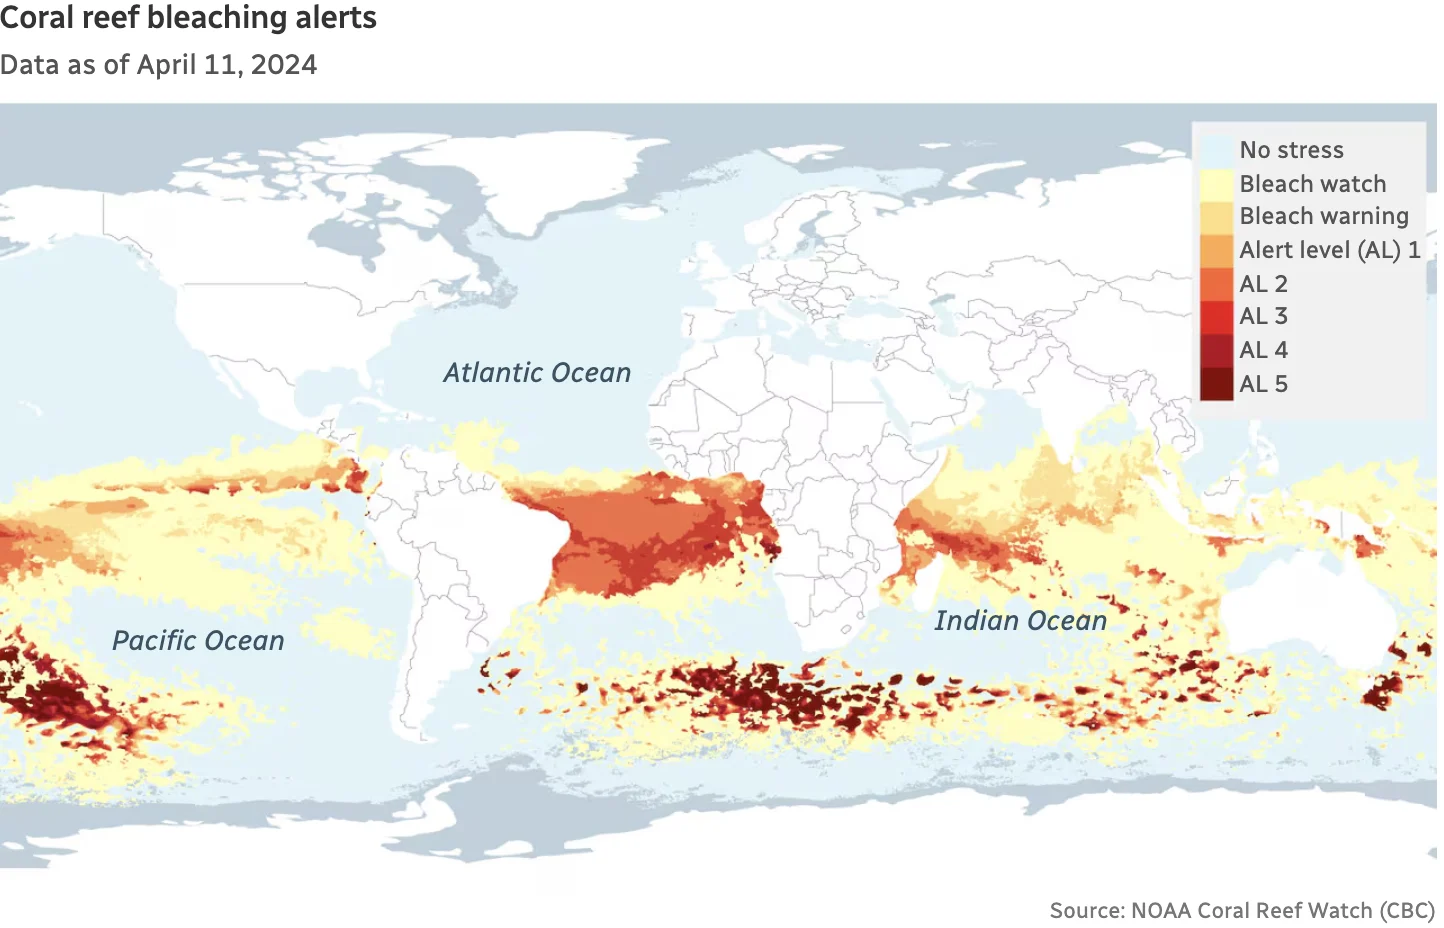 CBC: Coral reef bleaching alerts. Data as of April 11, 2024.